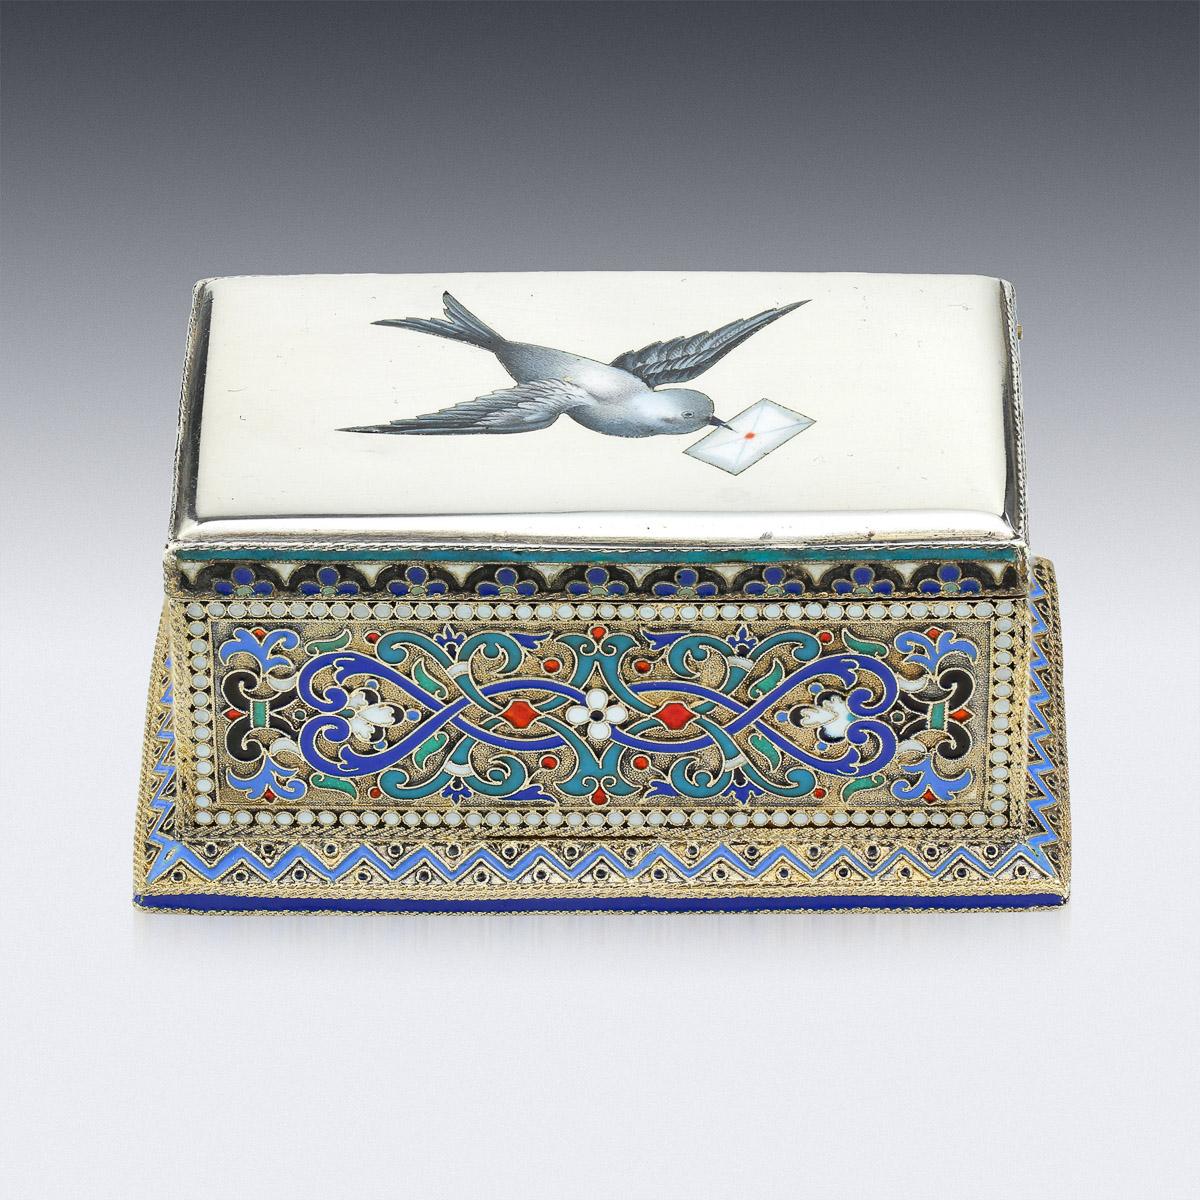 19th century Russian silver and hand painted champleve enamel stamp box, the lid depicting a bird carrying a letter in its beak, all side decorated with stylised floral design, the inside of the box is richly parcel gilded. Hallmarked Russian silver